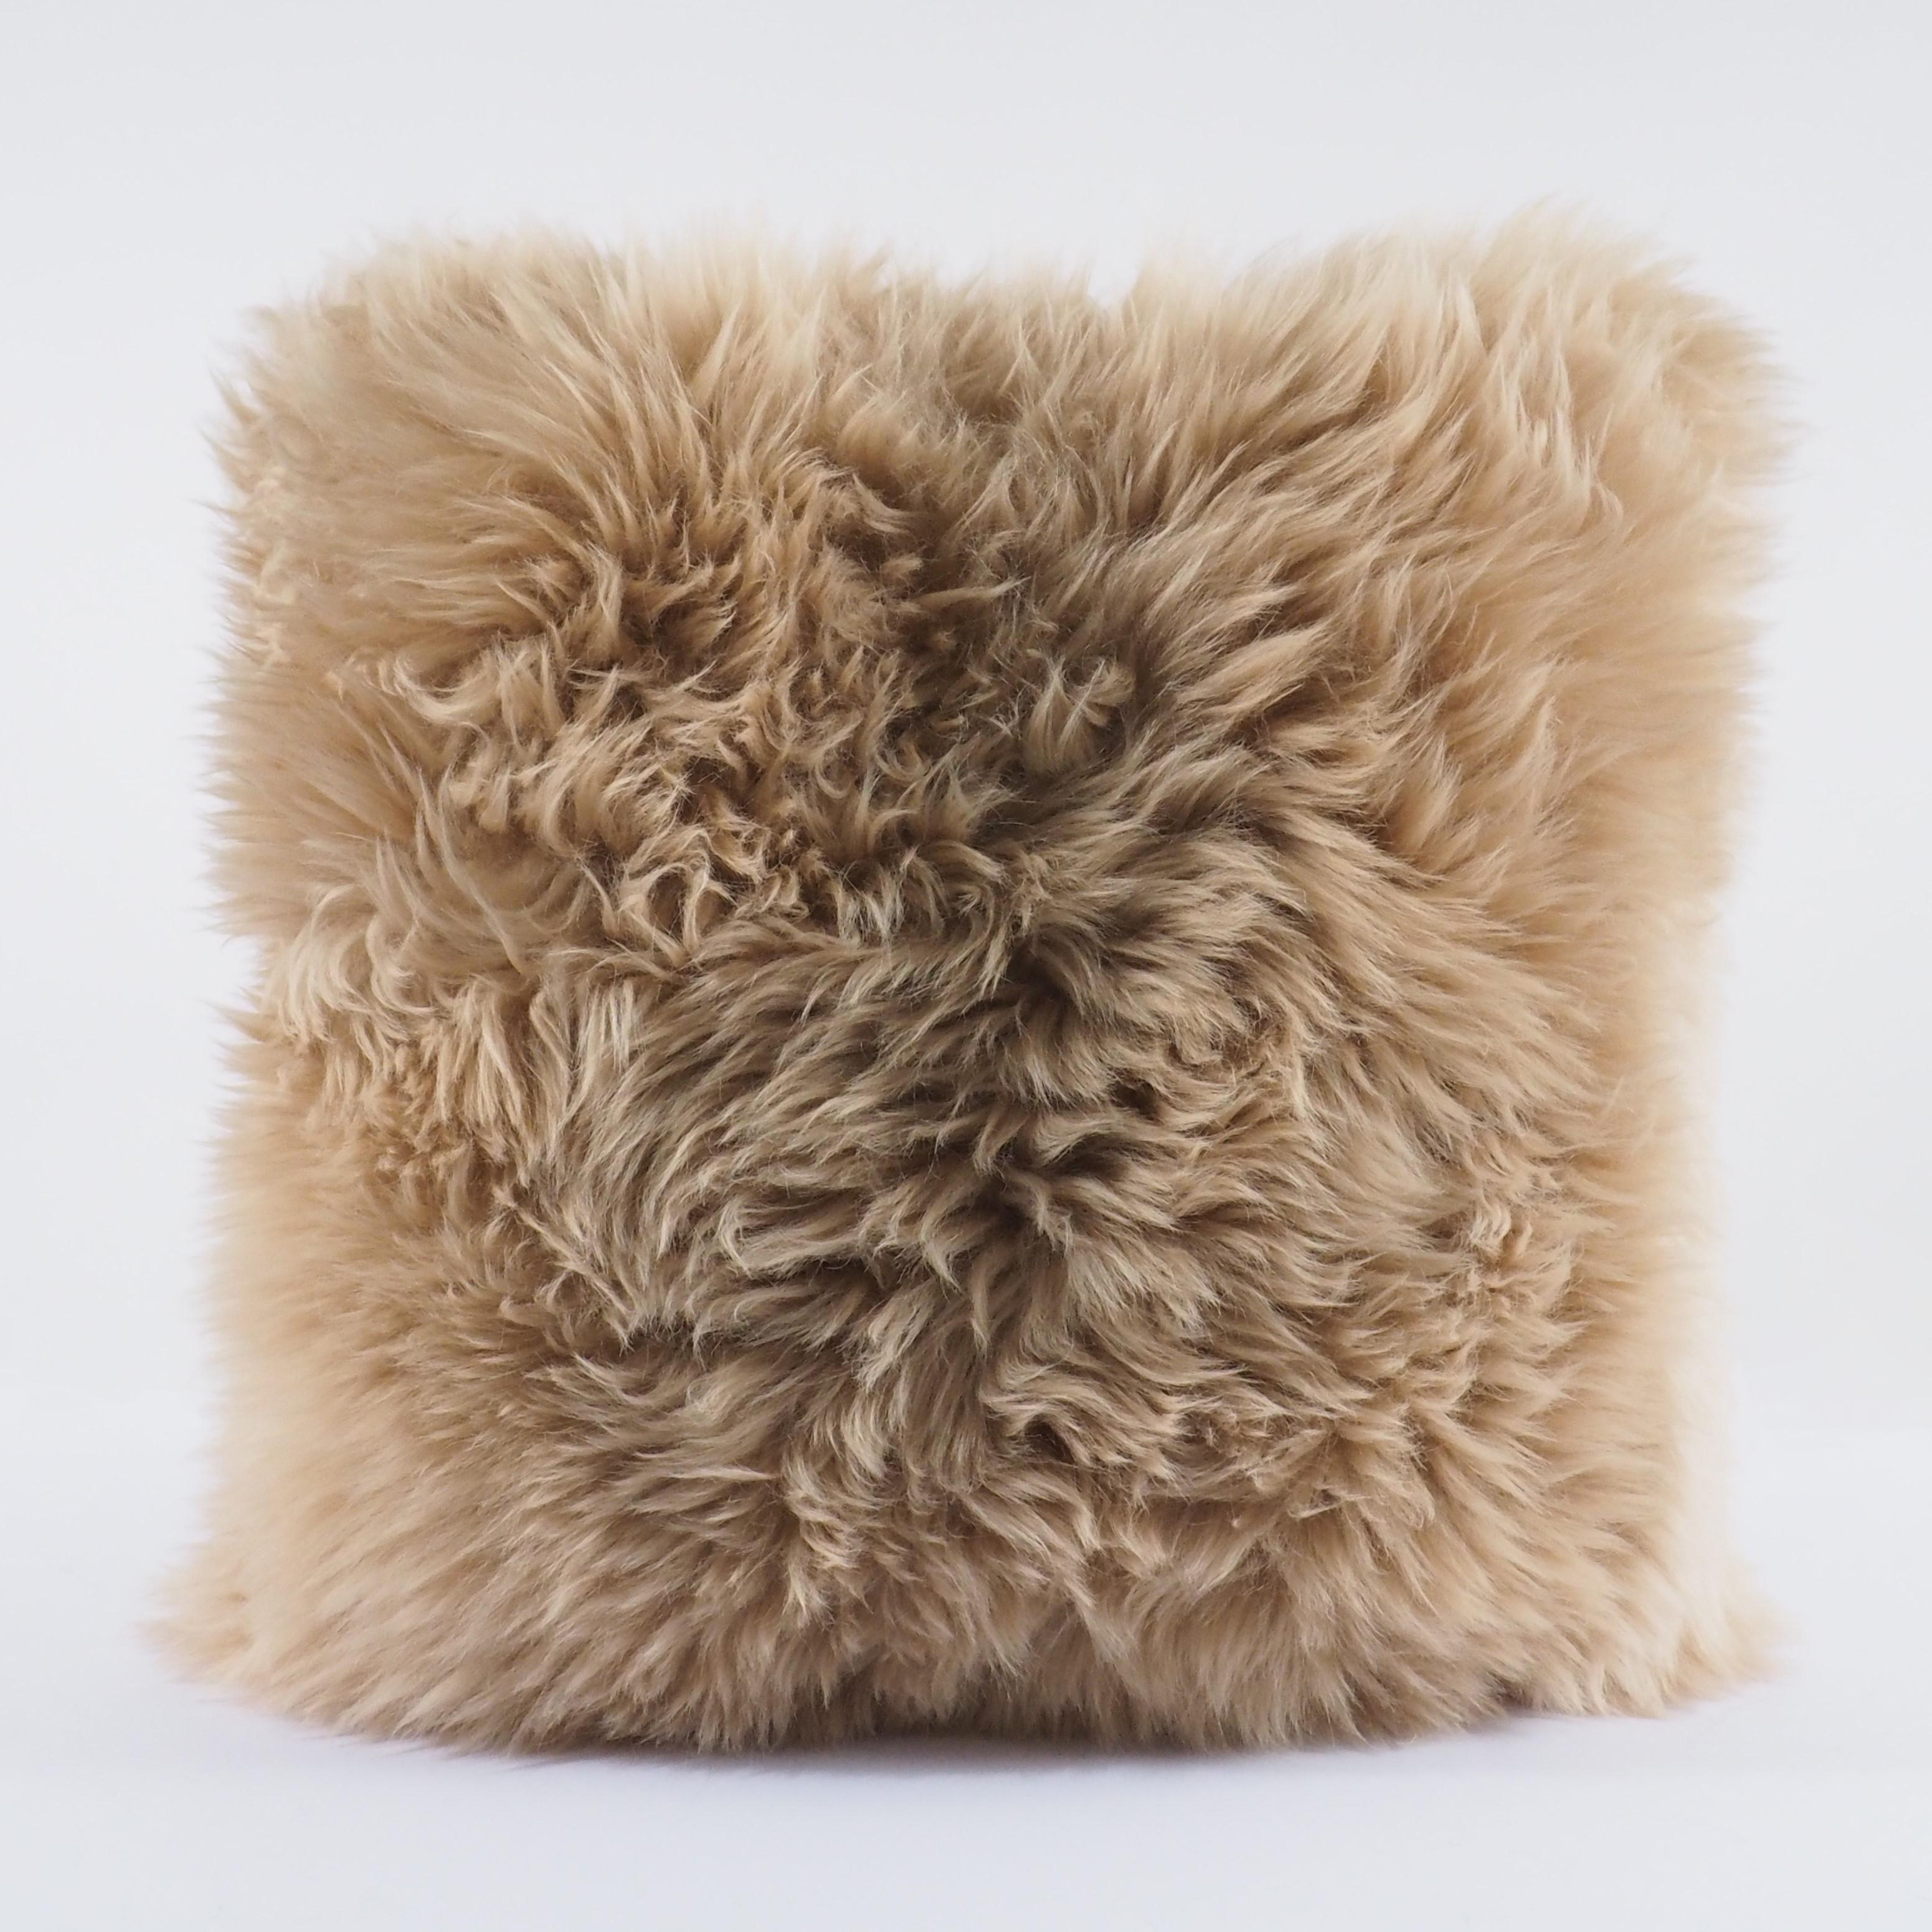 Camel Light Ollengo Shearling Sheepskin Pillow Fluffy Cushion by Muchi Decor In New Condition For Sale In Poviglio, IT